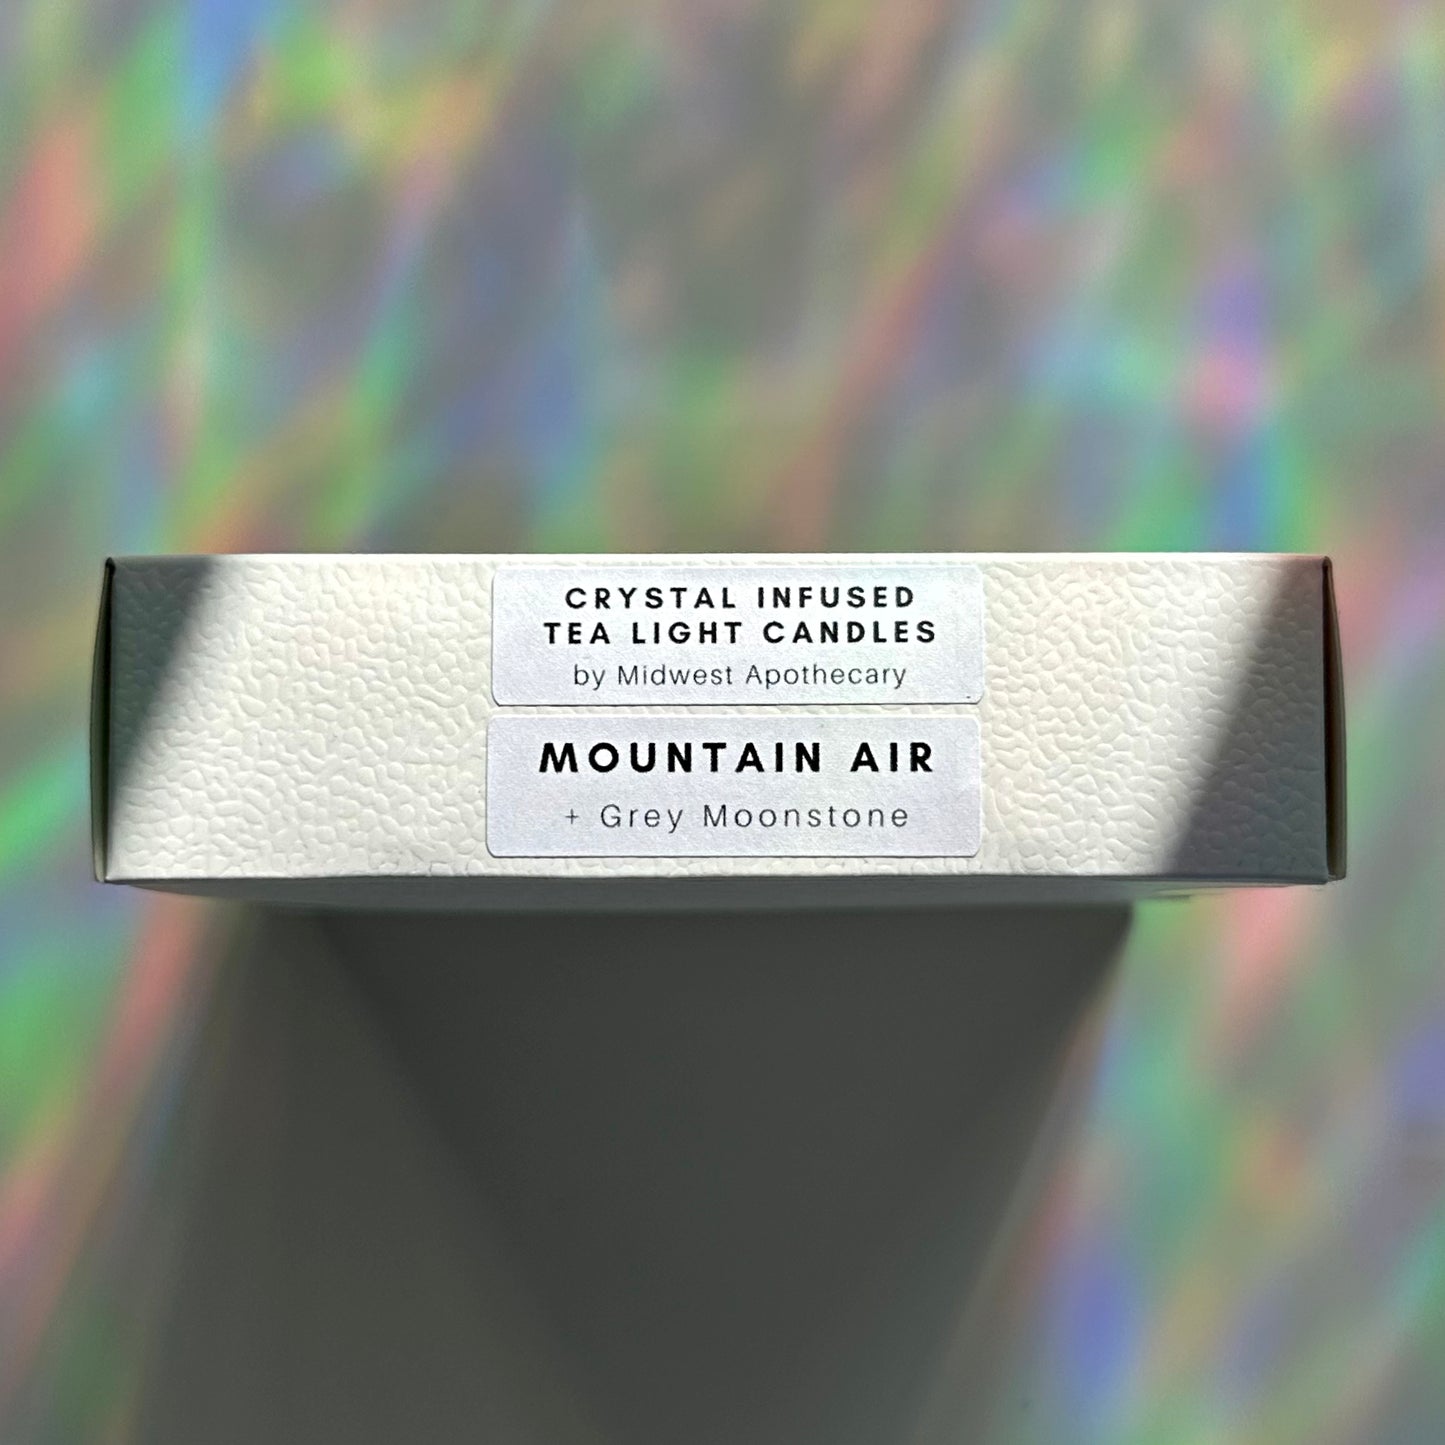 XL Crystal Infused Tea Light Candles | Mountain Air Scent